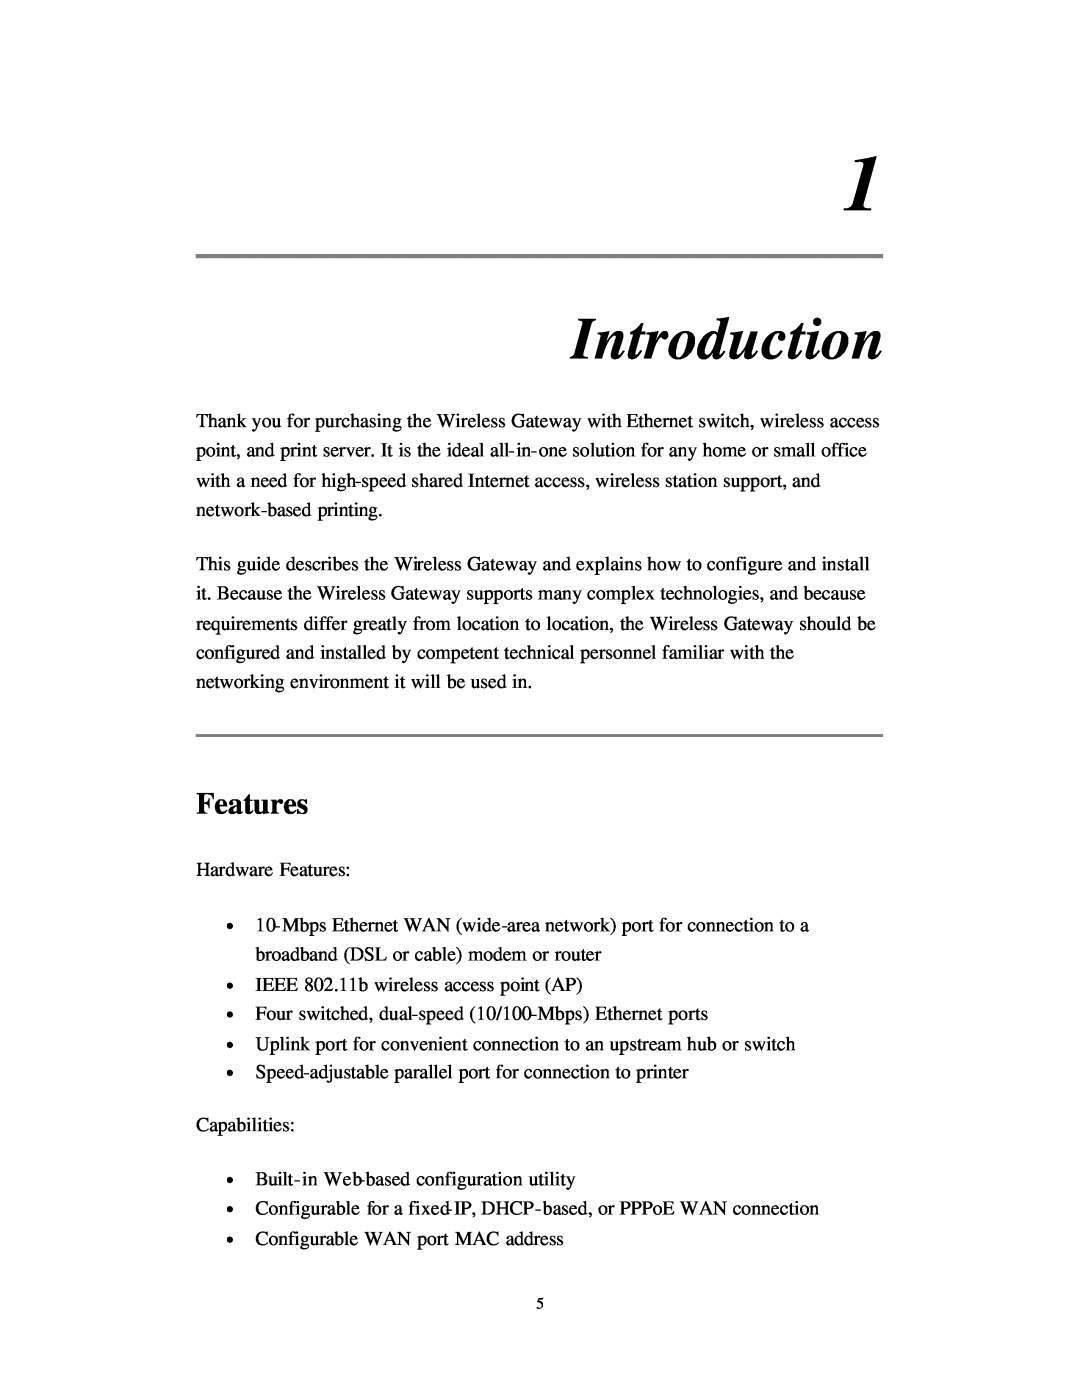 Nlynx Wireless Gateway manual Introduction, Features 